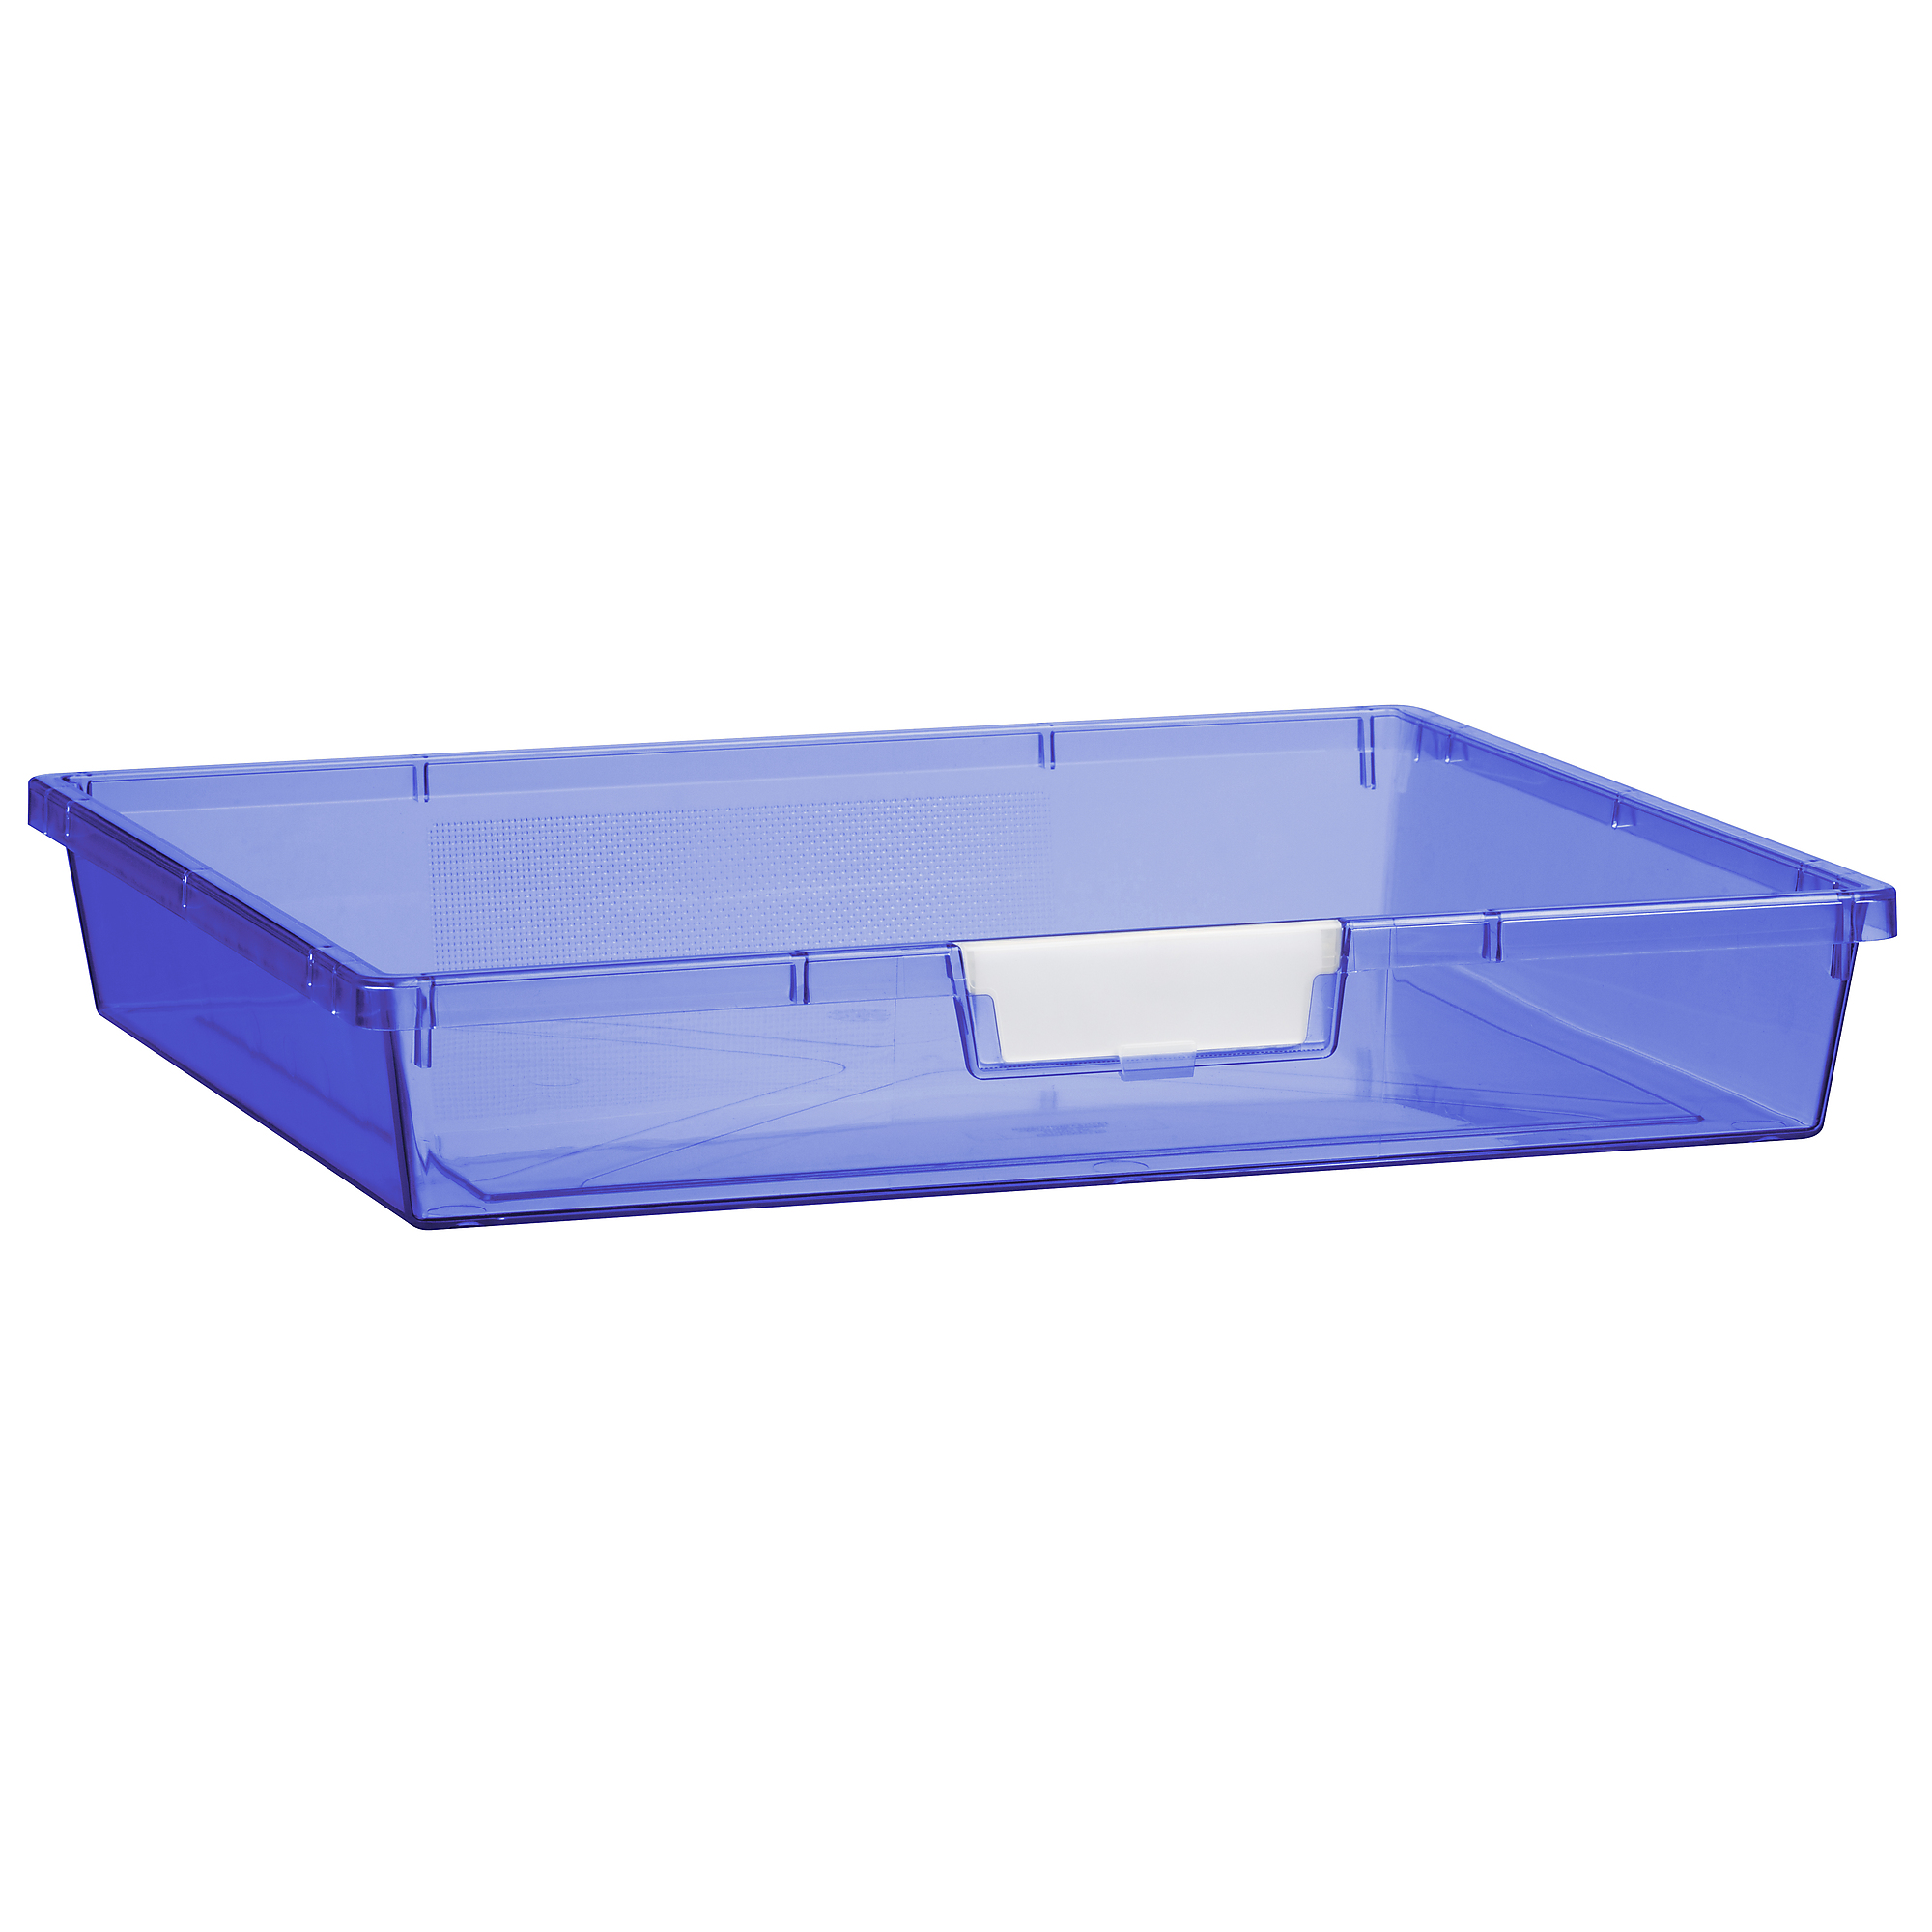 Certwood StorWerks, Wide Line Tray 3Inch in Tinted Blue - 1 Pack, Included (qty.) 1, Material Plastic, Height 12 in, Model CE1956TB1